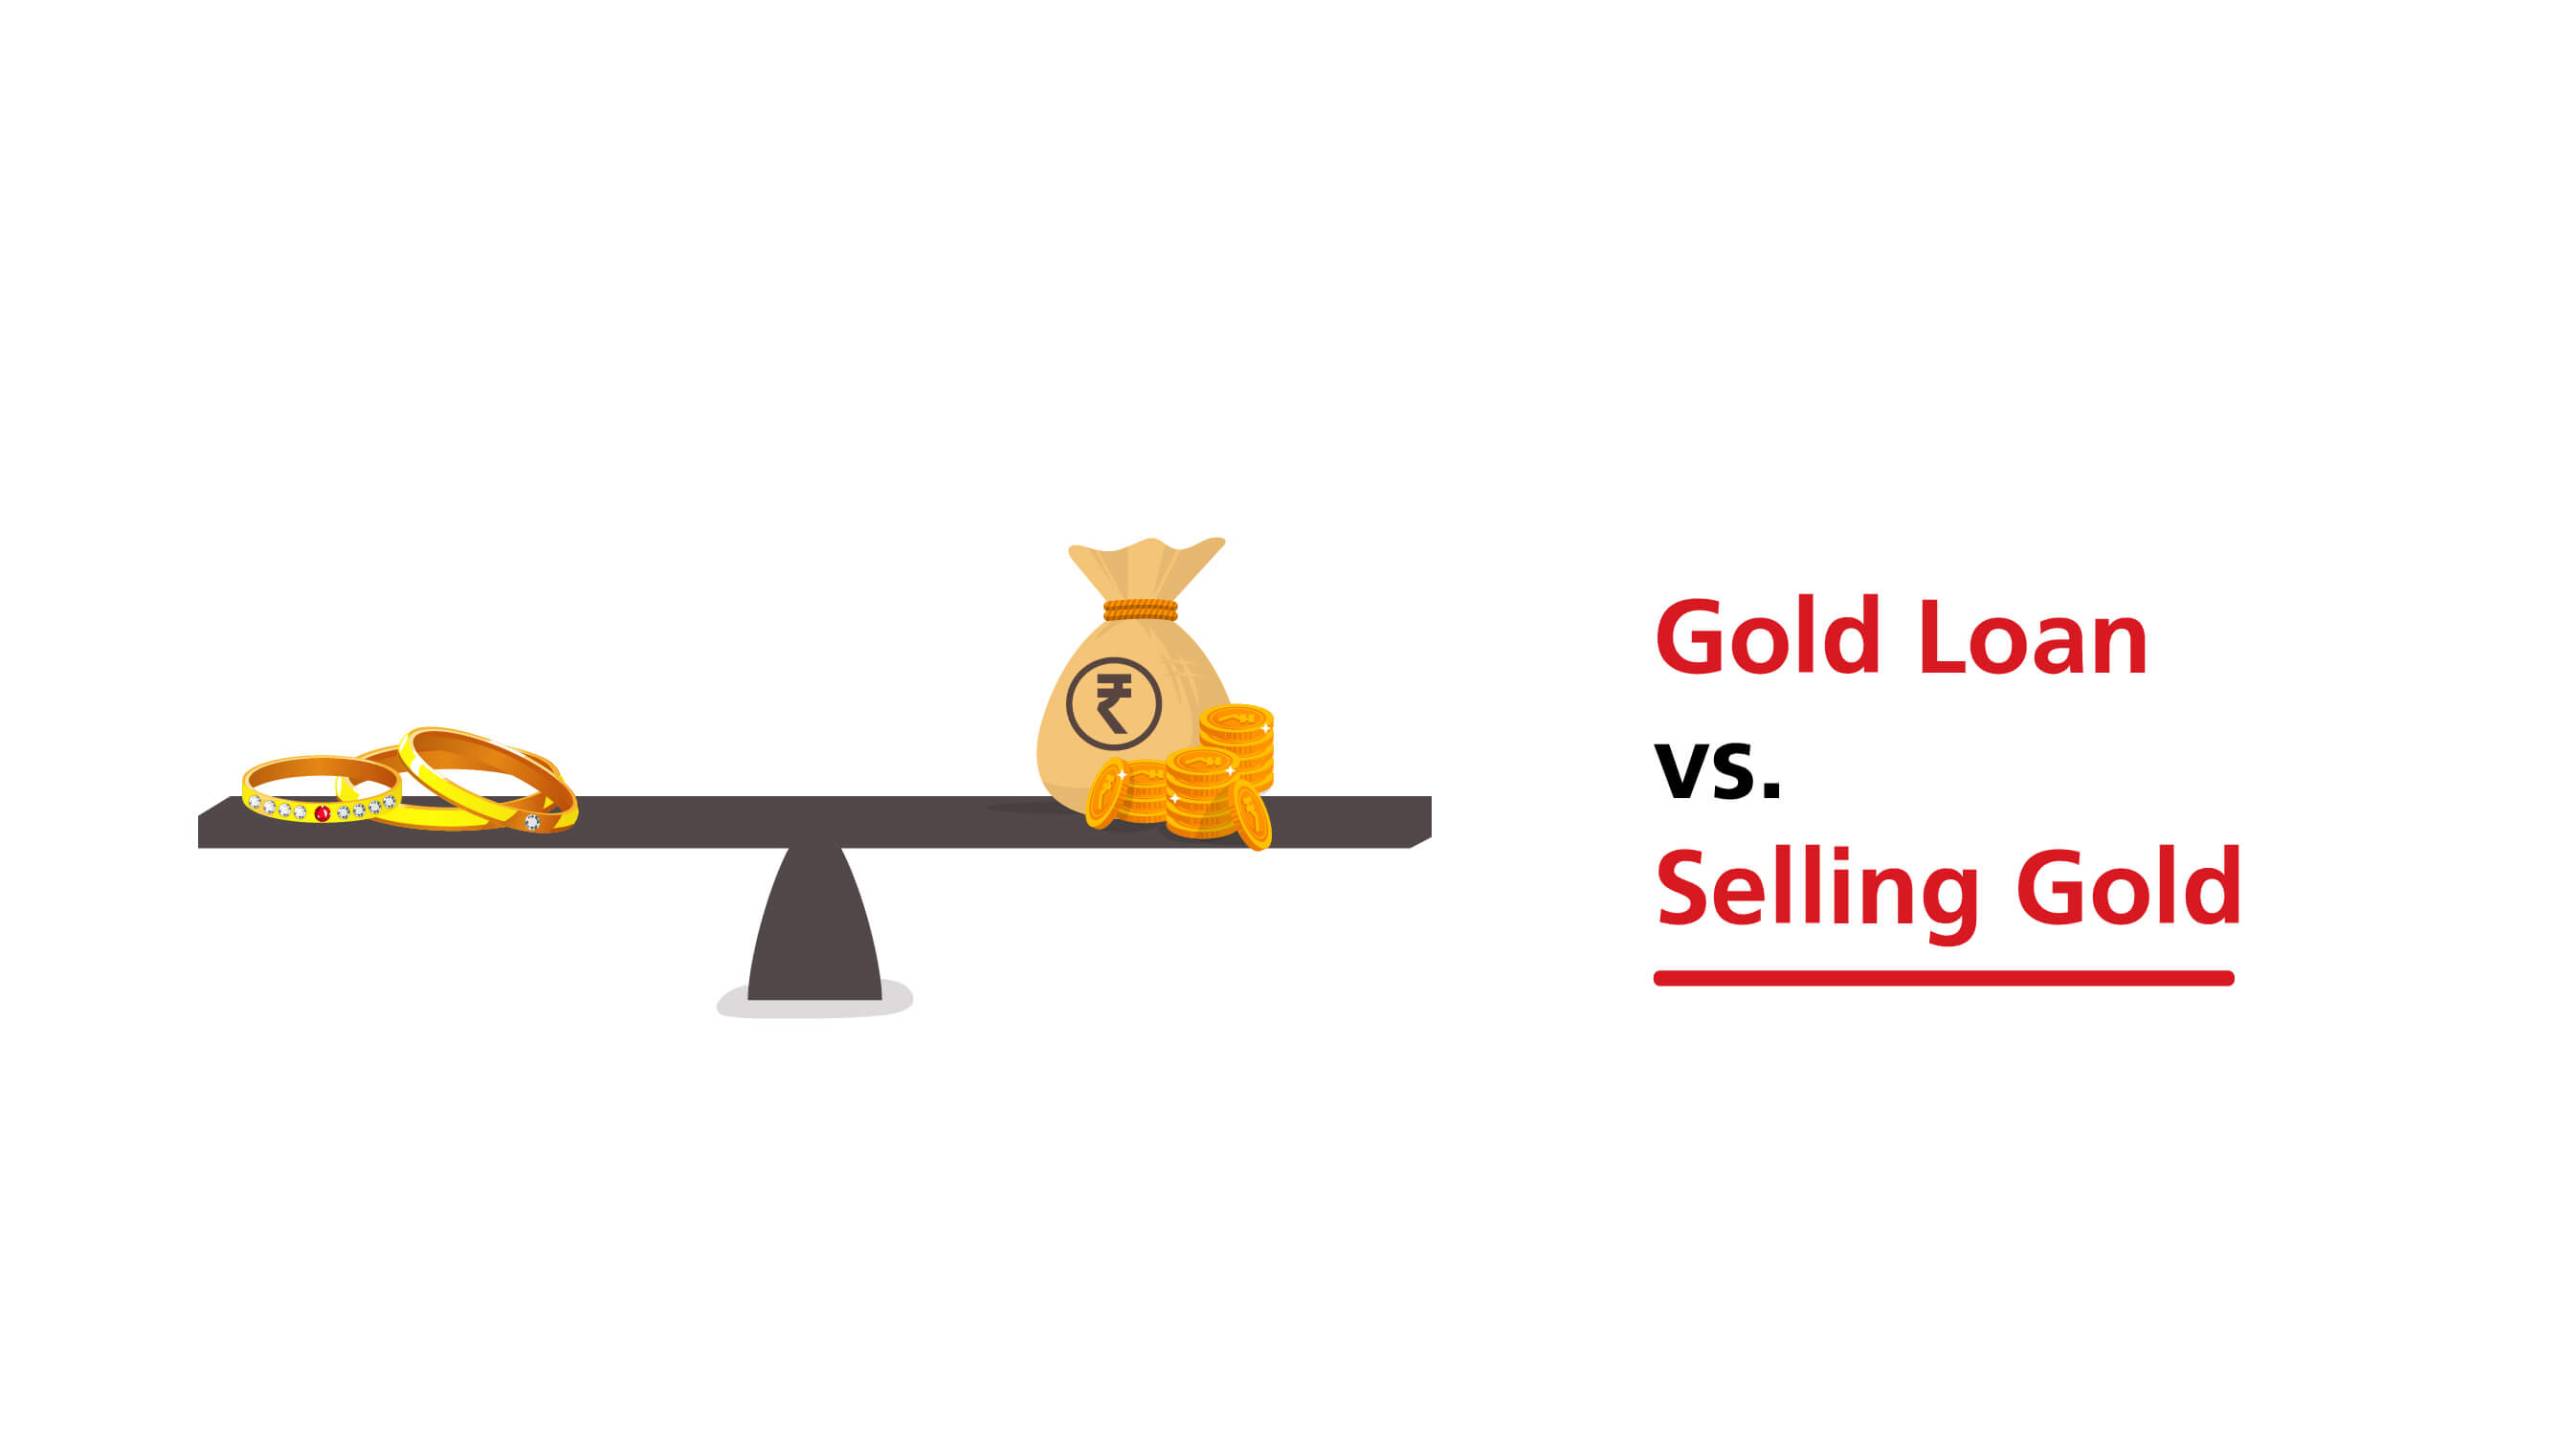 Gold Loan vs. Selling Gold: Which Option Makes More Financial Sense